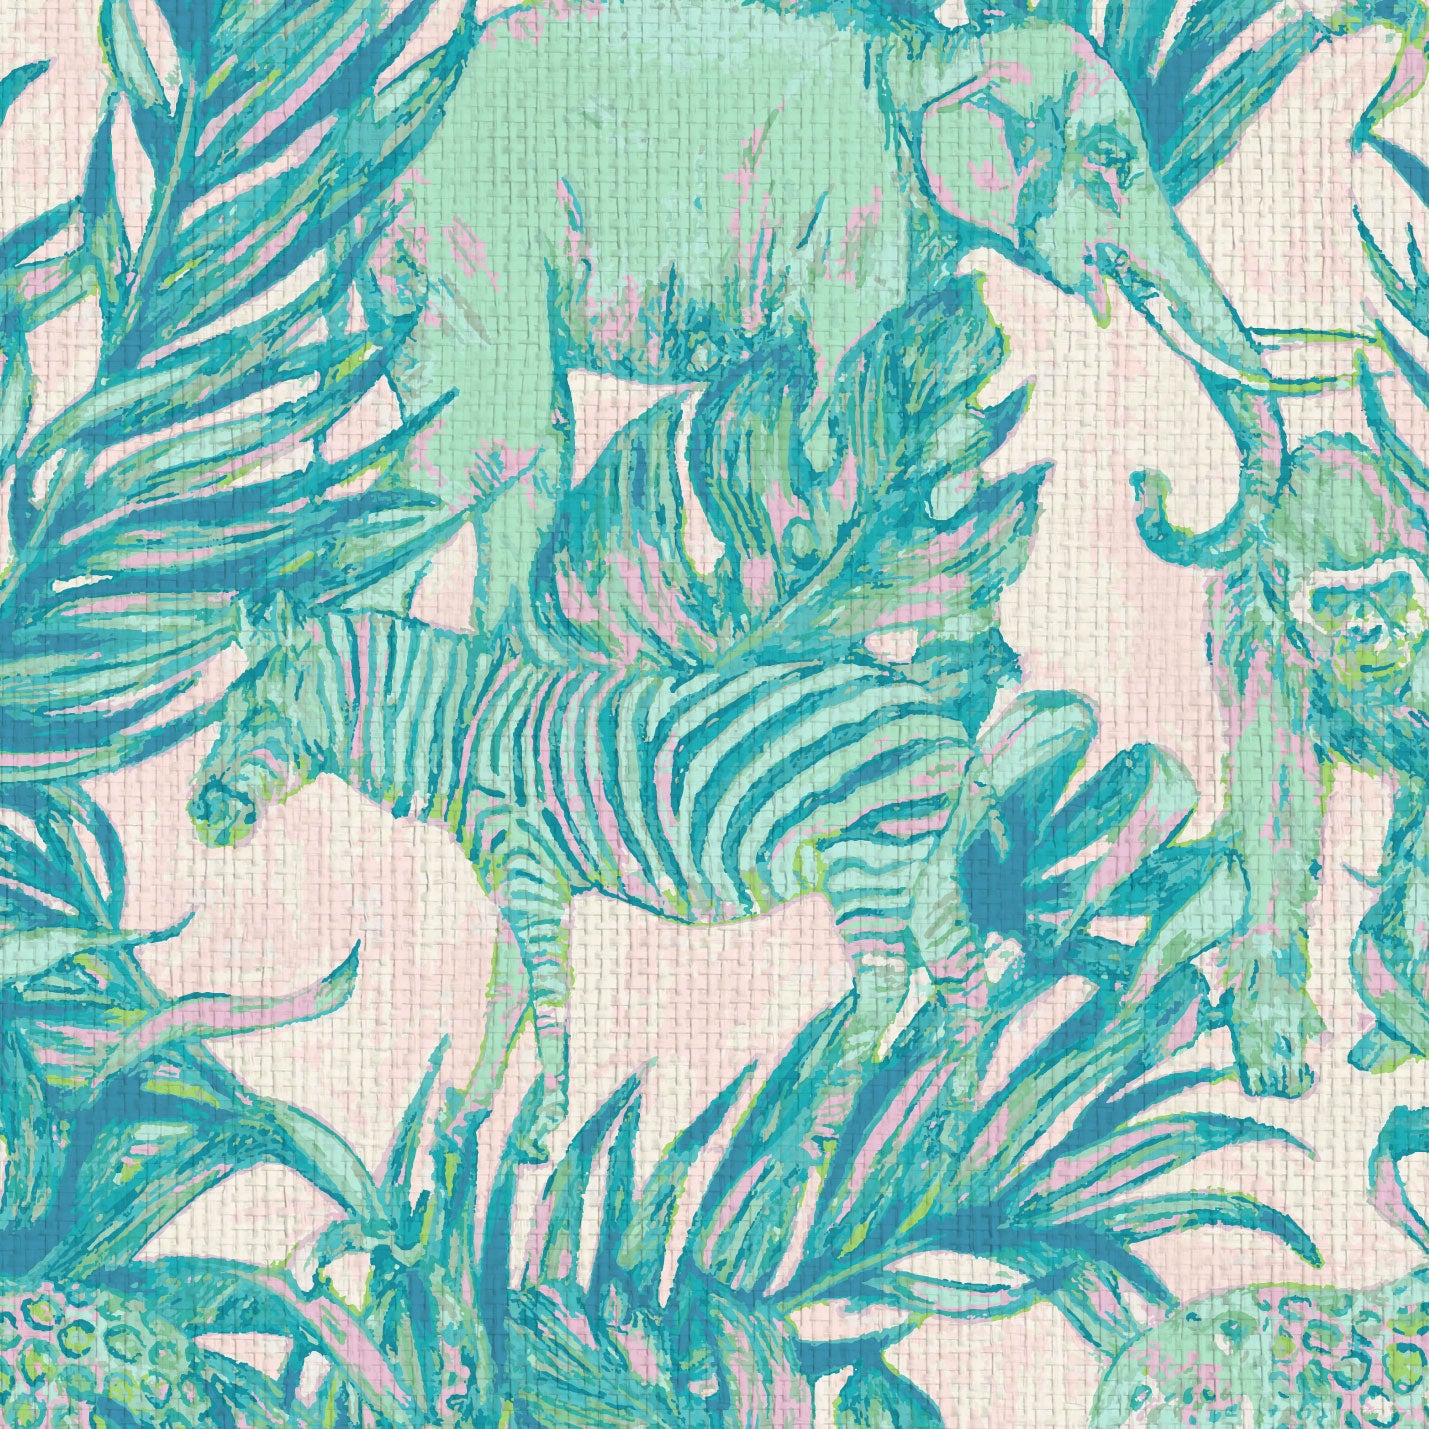 wallpaper Natural Textured Eco-Friendly Non-toxic High-quality Sustainable Interior Design Bold Custom Tropical Jungle Coastal Garden palm leaf tree zoo safari elephant zebra cheetah gorilla water color oversized kids playroom nursery teal green pastel neon pink paperweave paper weave